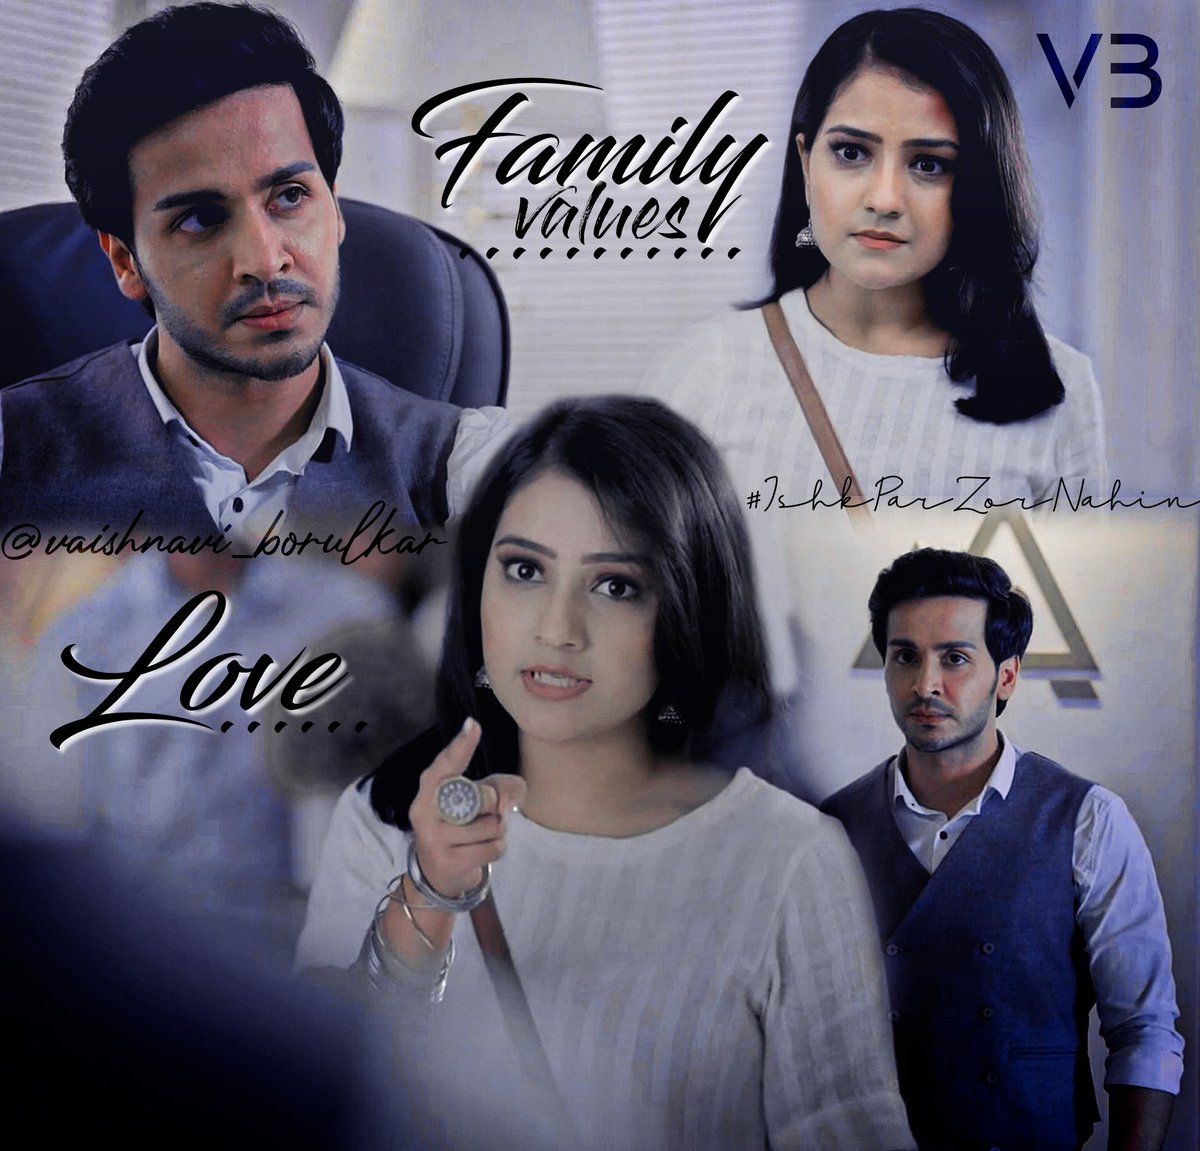 "IT IS ALWAYS ABOUT FAMILY VALUES v/s IT IS ALWAYS ABOUT LOVE."  #IshkParZorNahin  #paramsingh  @8paramsingh  @SonyTV